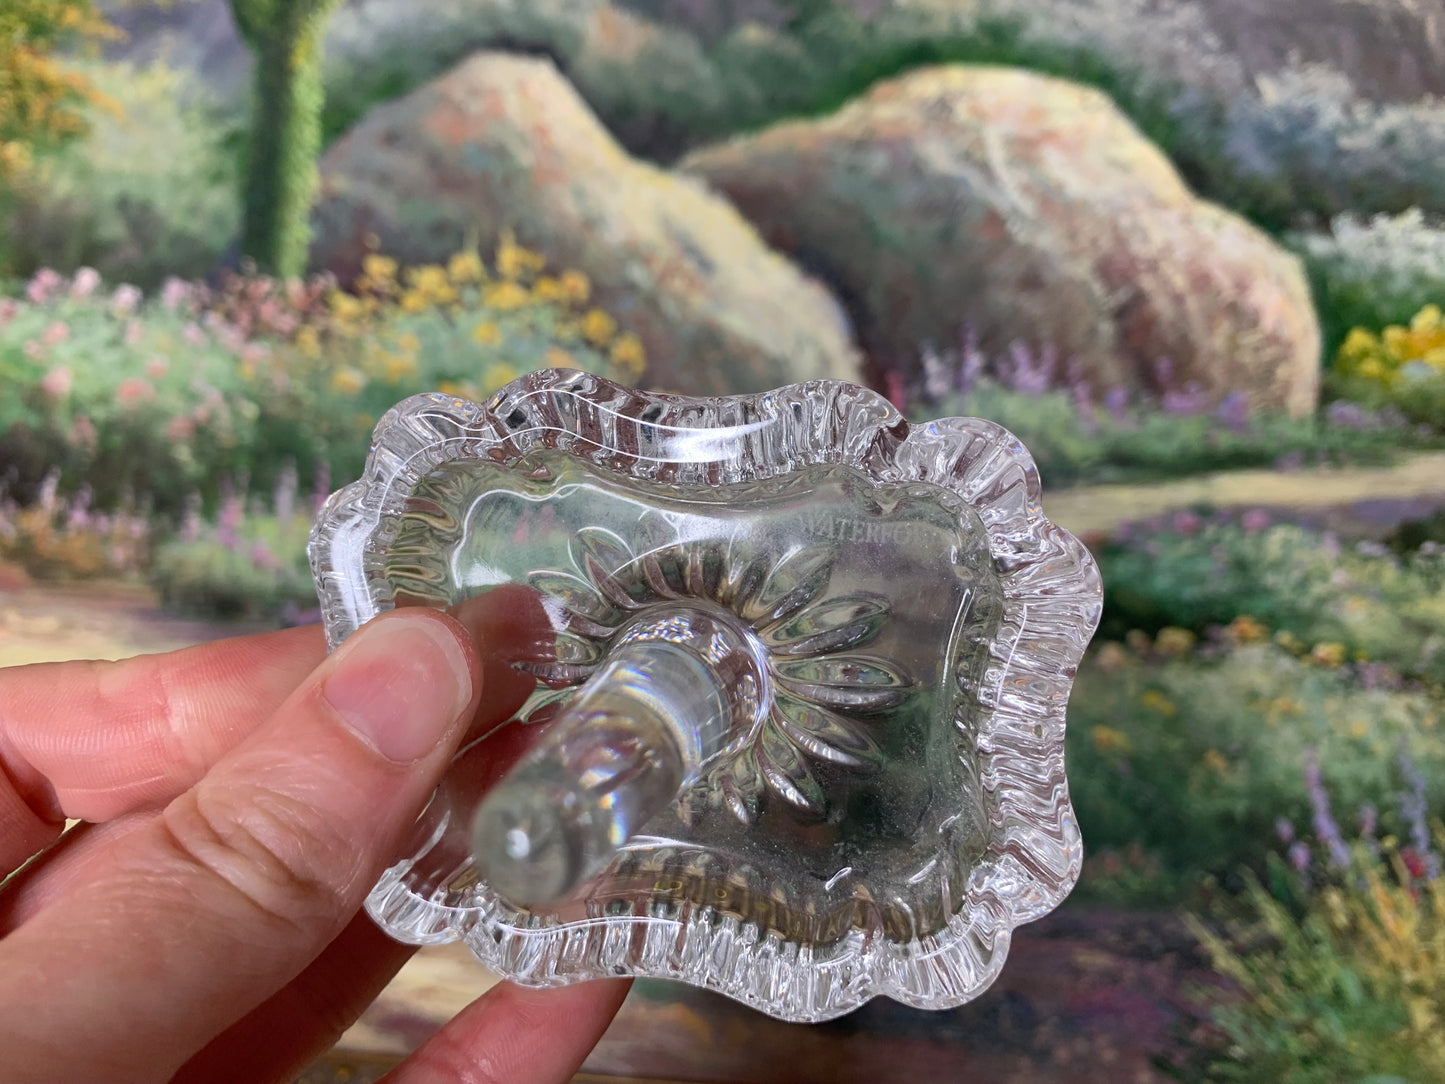 Waterford Crystal ring holder - Excellent condition!